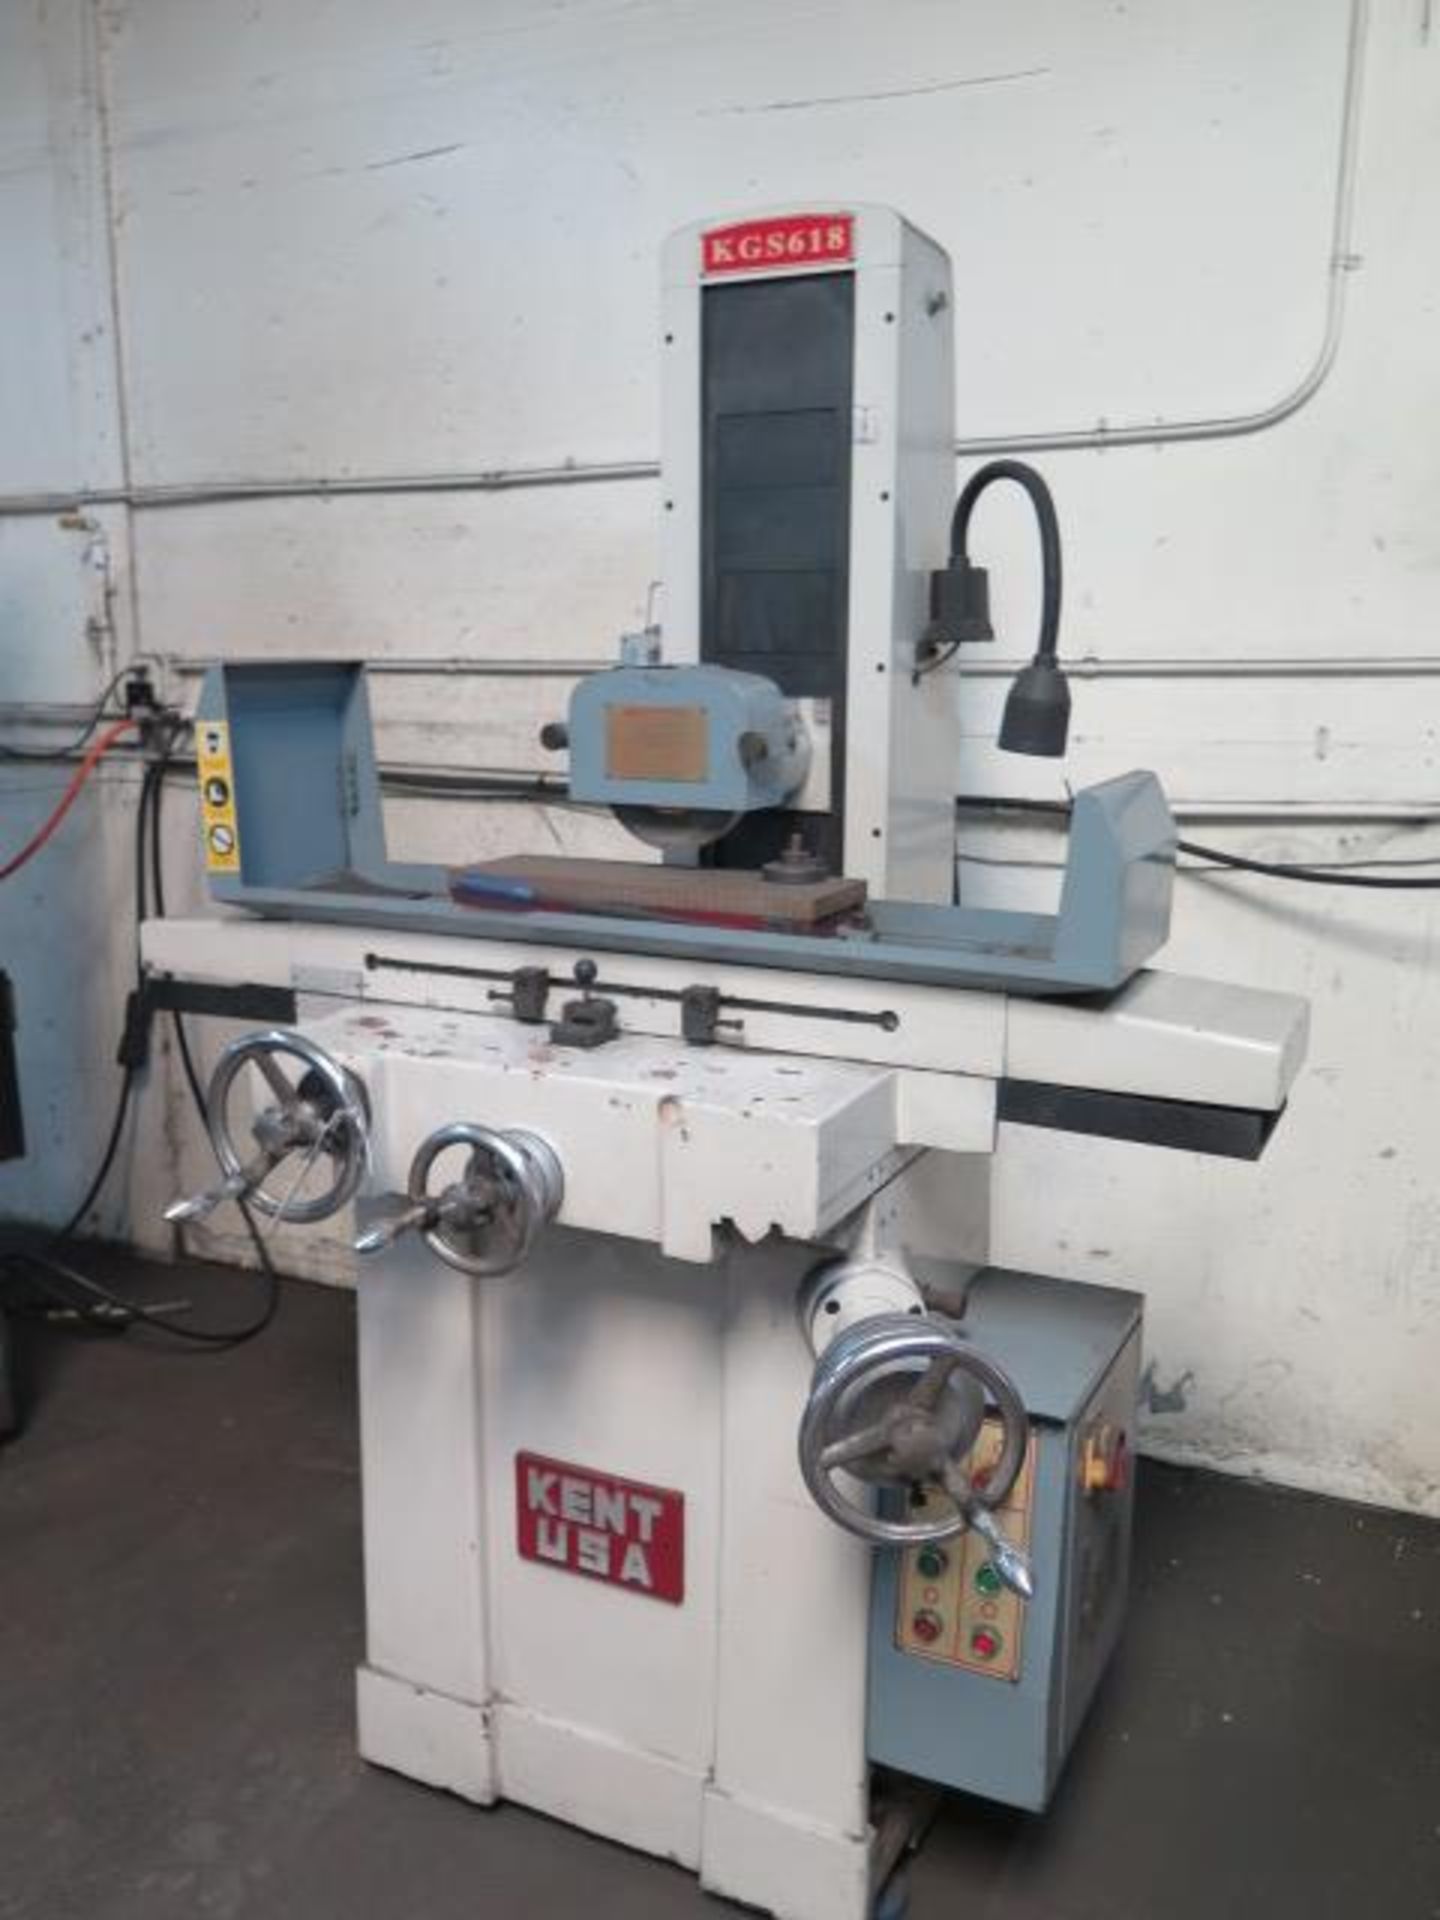 2013 Kent KGS618 6” x 18” Surface Grinder s/n KT143296 w/ 6” x 18” Magnetic Chuck (SOLD AS-IS - NO - Image 3 of 15